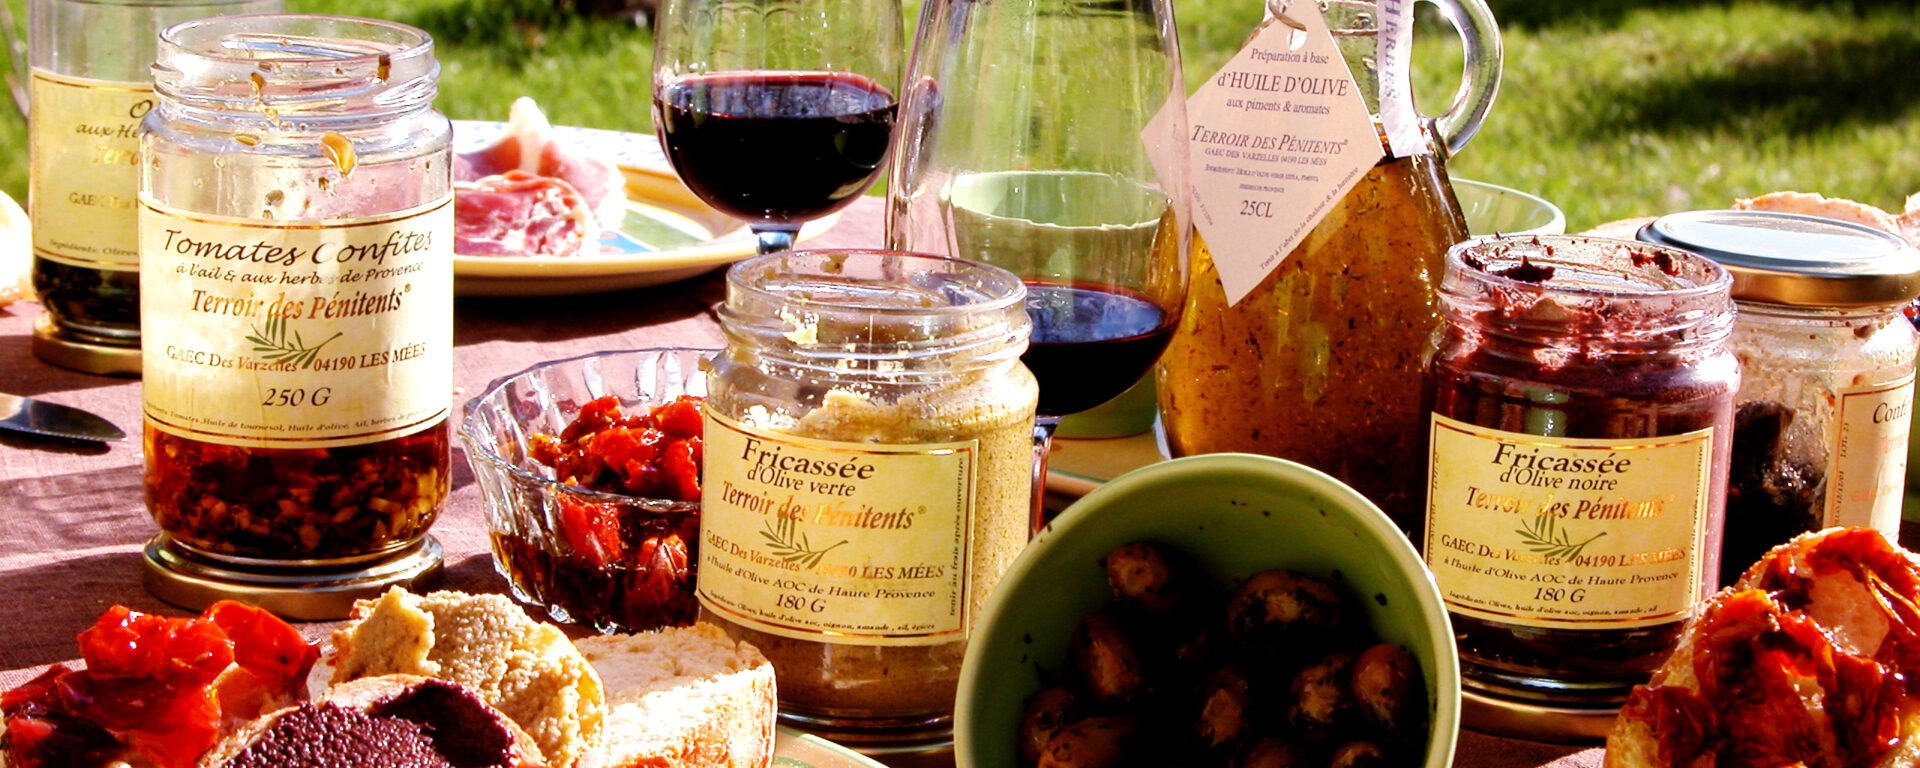 products of the French terroir